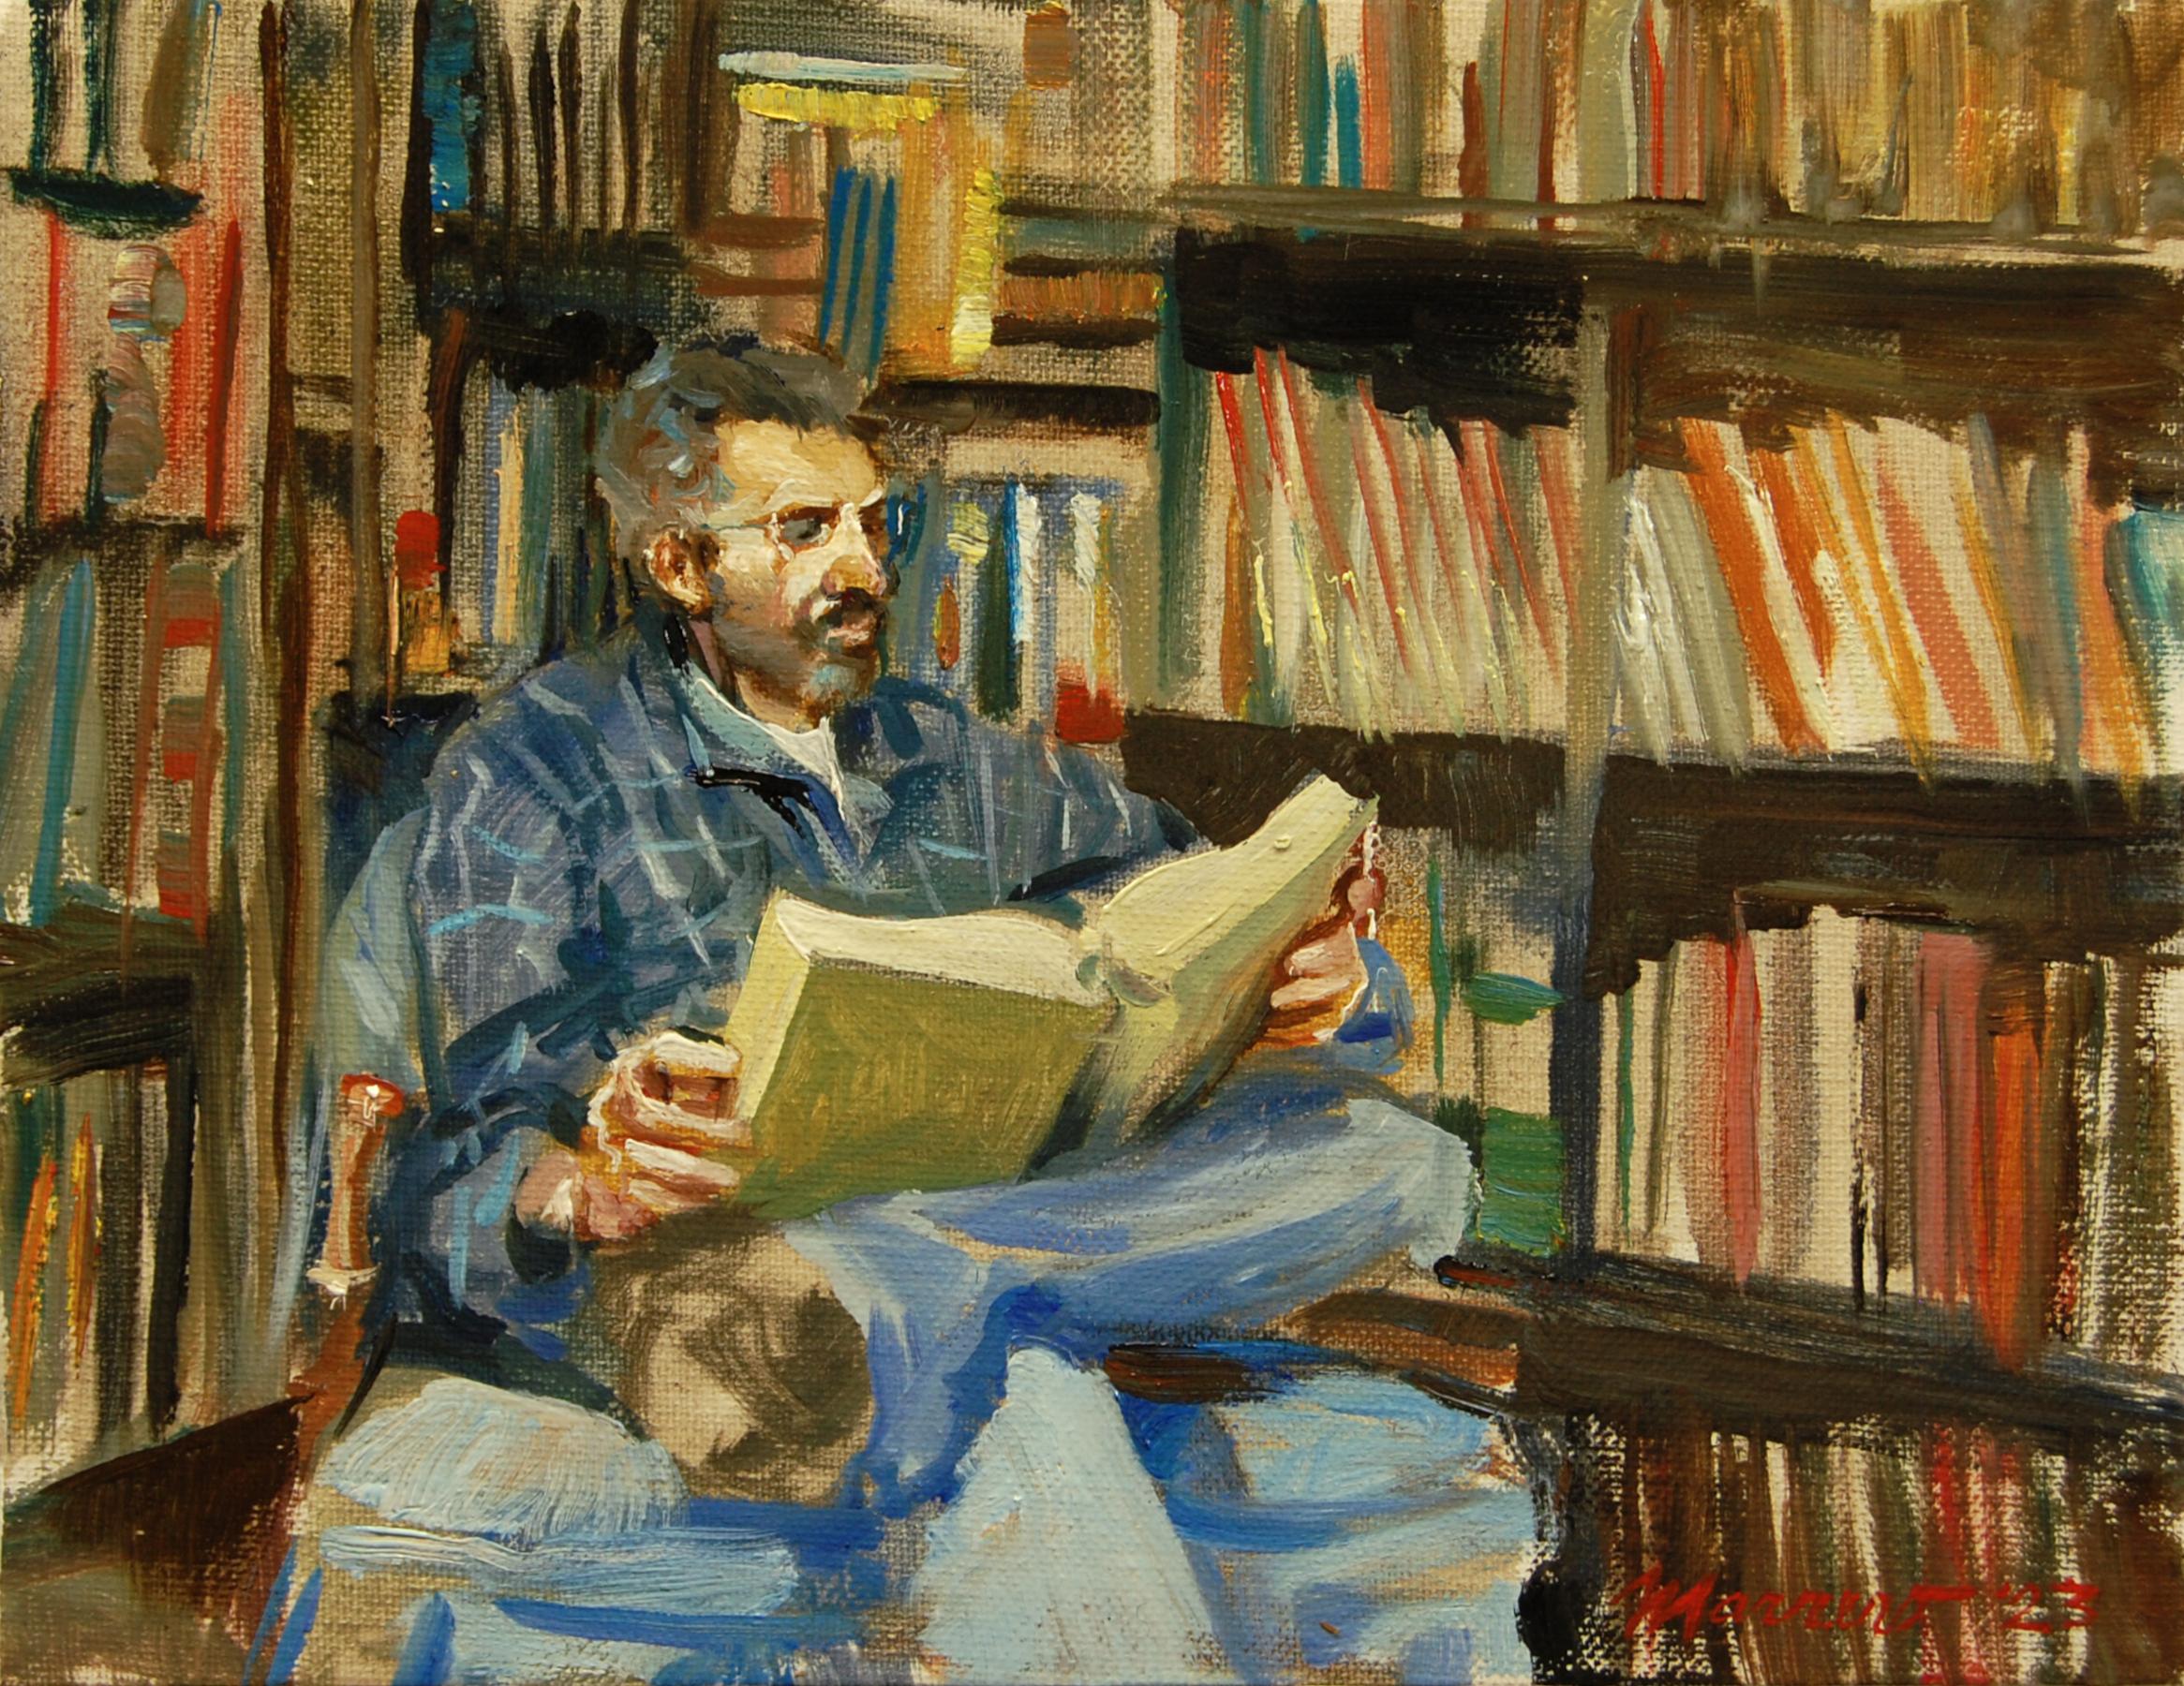 Lenny at the Book Barn, Oil Painting - Art by Onelio Marrero